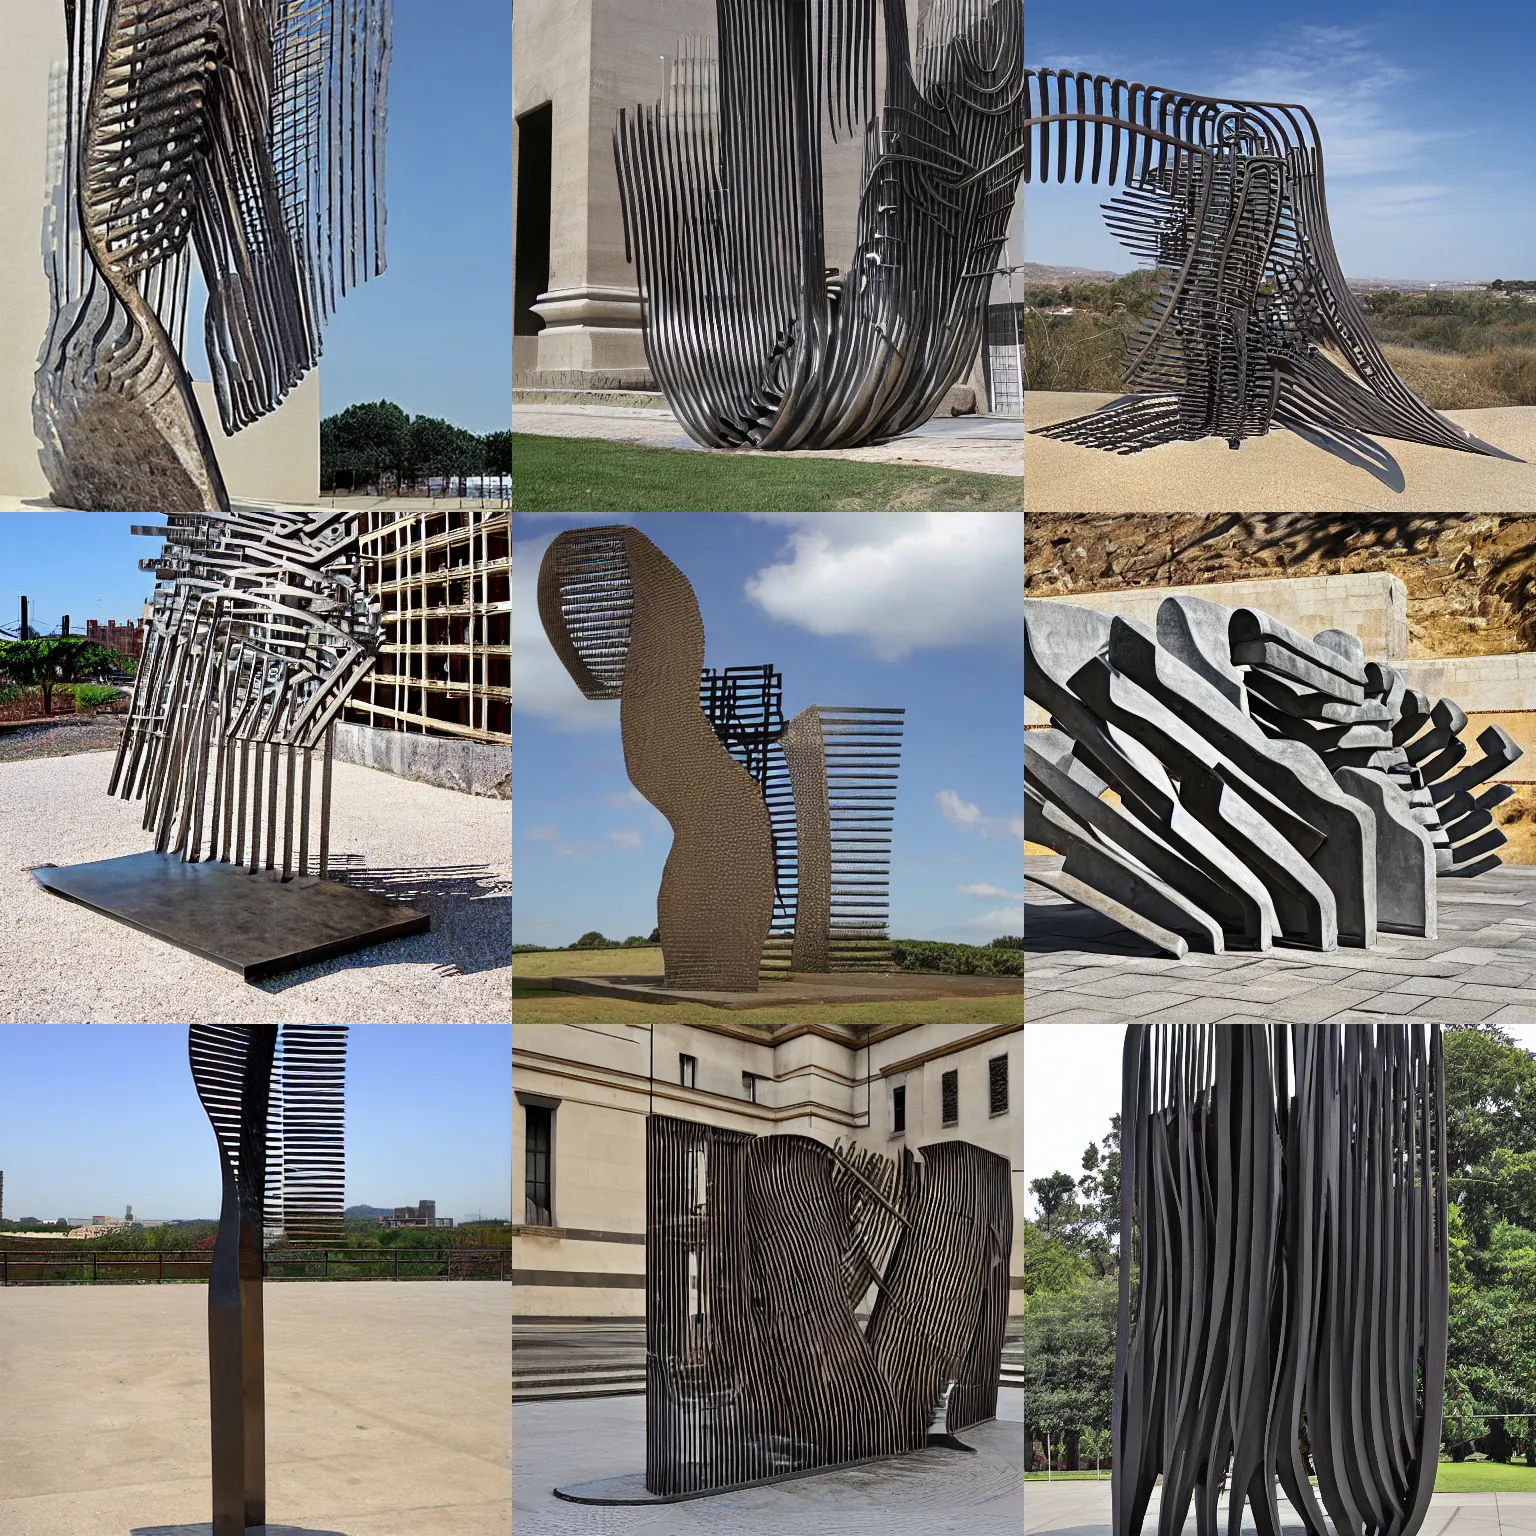 Prompt: The Comb of the Wind. Award-winning sculpture by Eduardo Chillida and Giovanni Battista Piranesi, made of steel